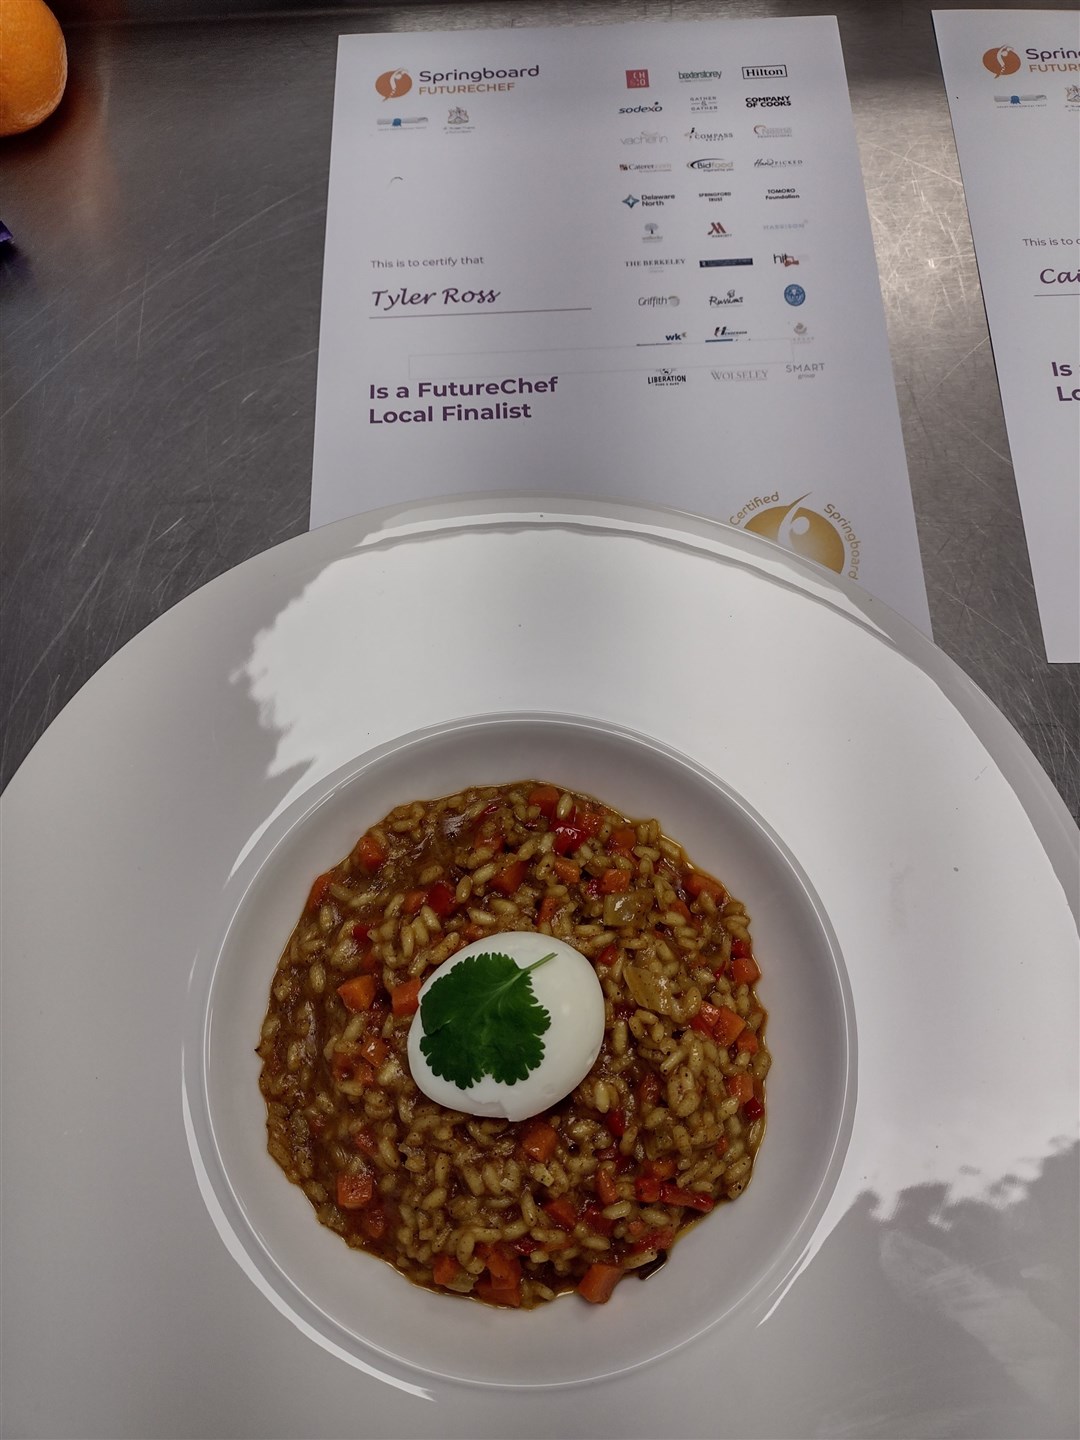 Head judge Graeme Strachan said Tyler produced a "lovely risotto topped with a perfectly cooked egg".